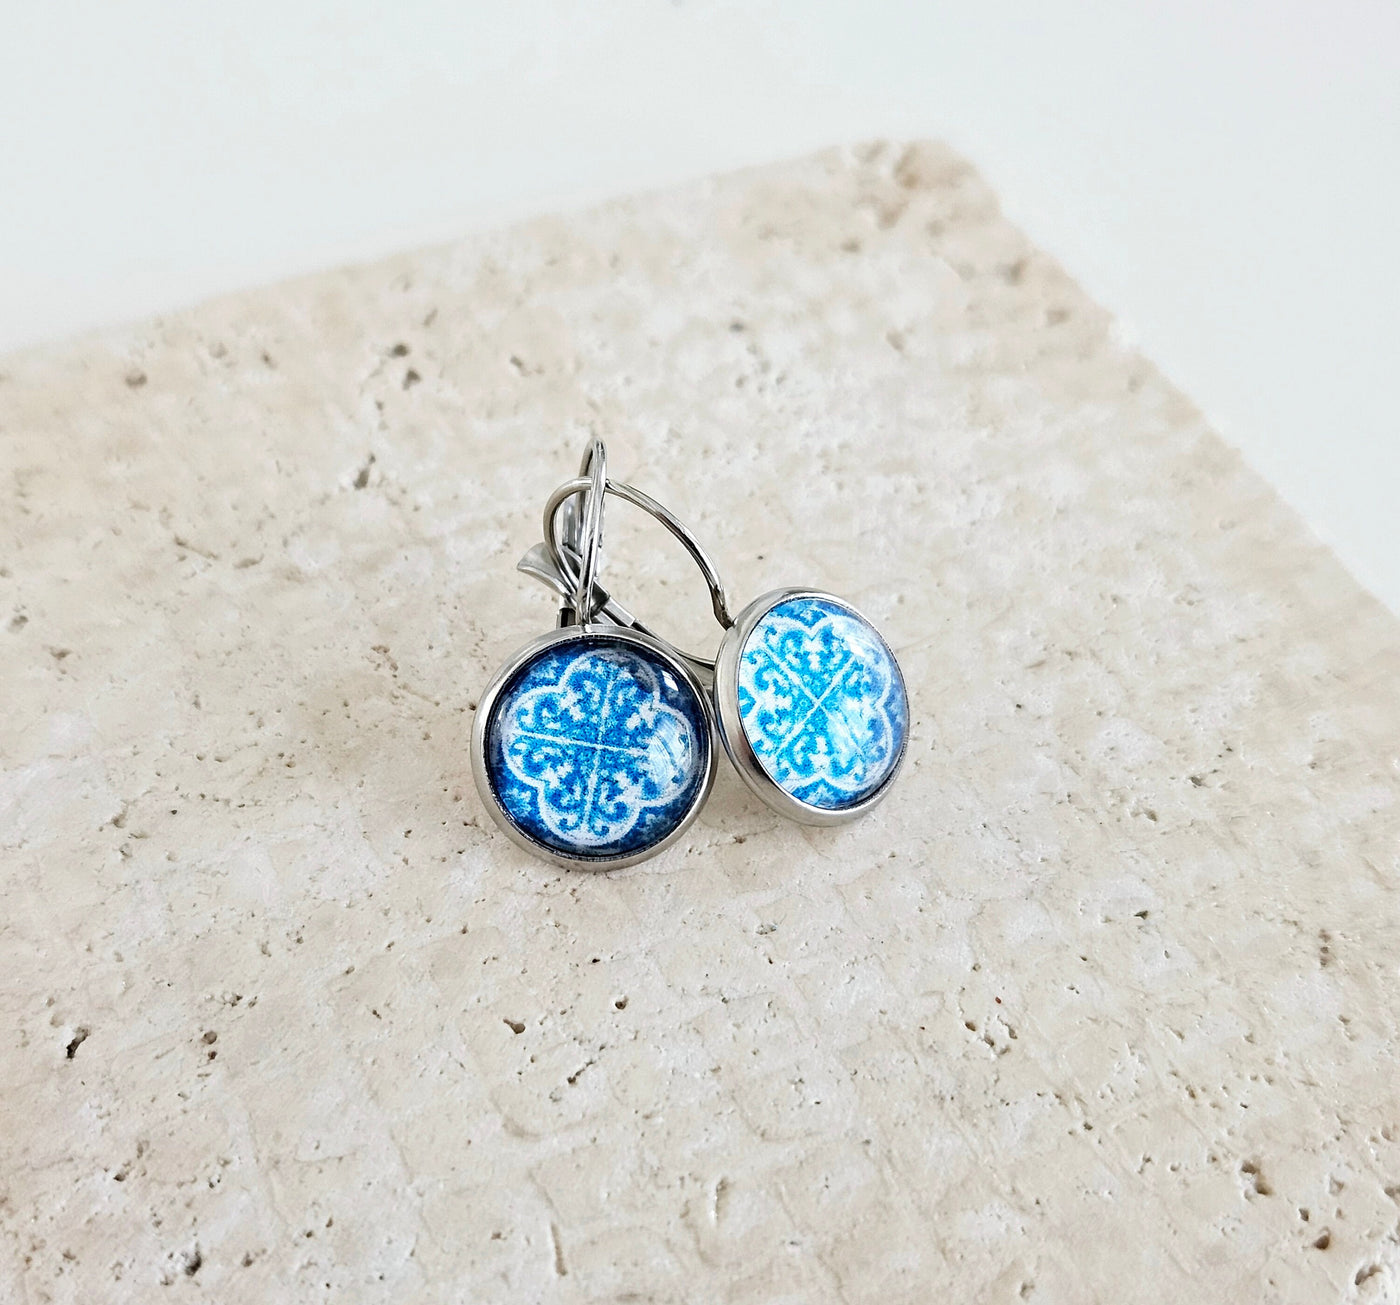 Portugal Blue Tile Earring Azulejo Jewelry Classical Antique Tile Earring Geometric Round Earring Gift from Portugal Travel Vacation Gift